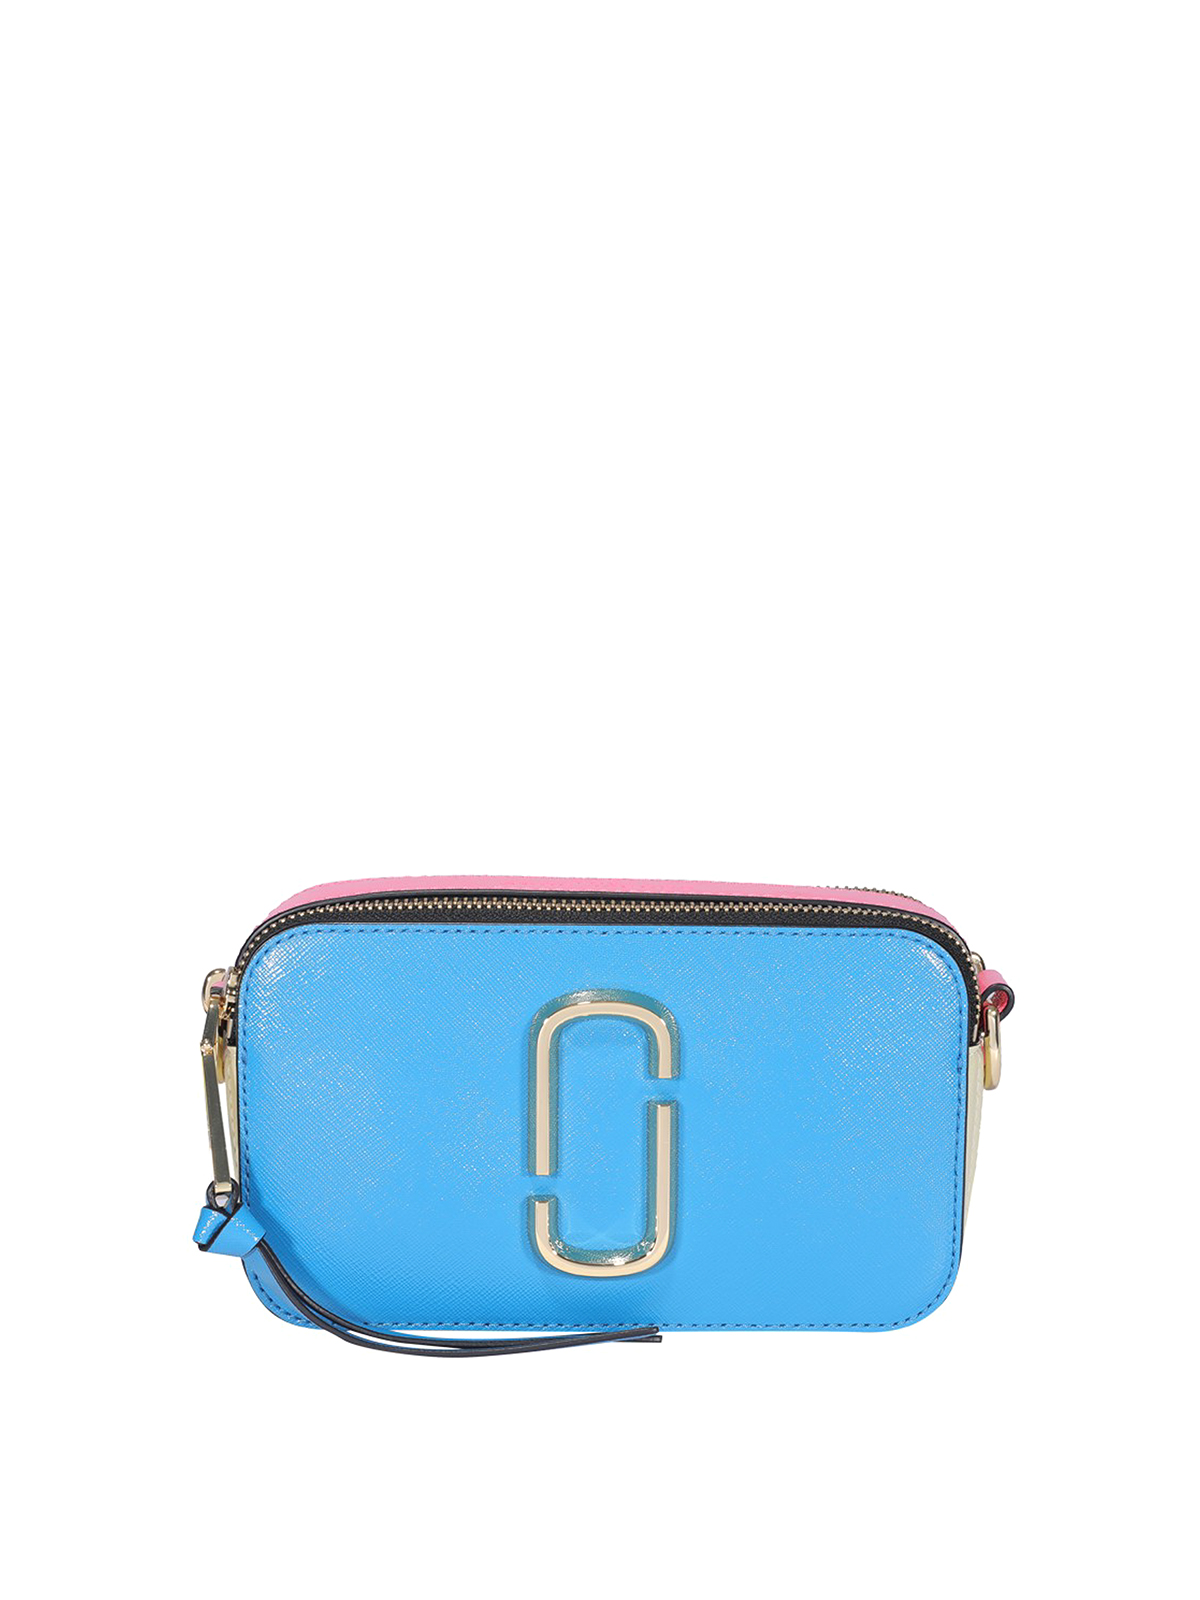 Marc Jacobs The Snapshot Leather Camera Bag - Green/Light Blue